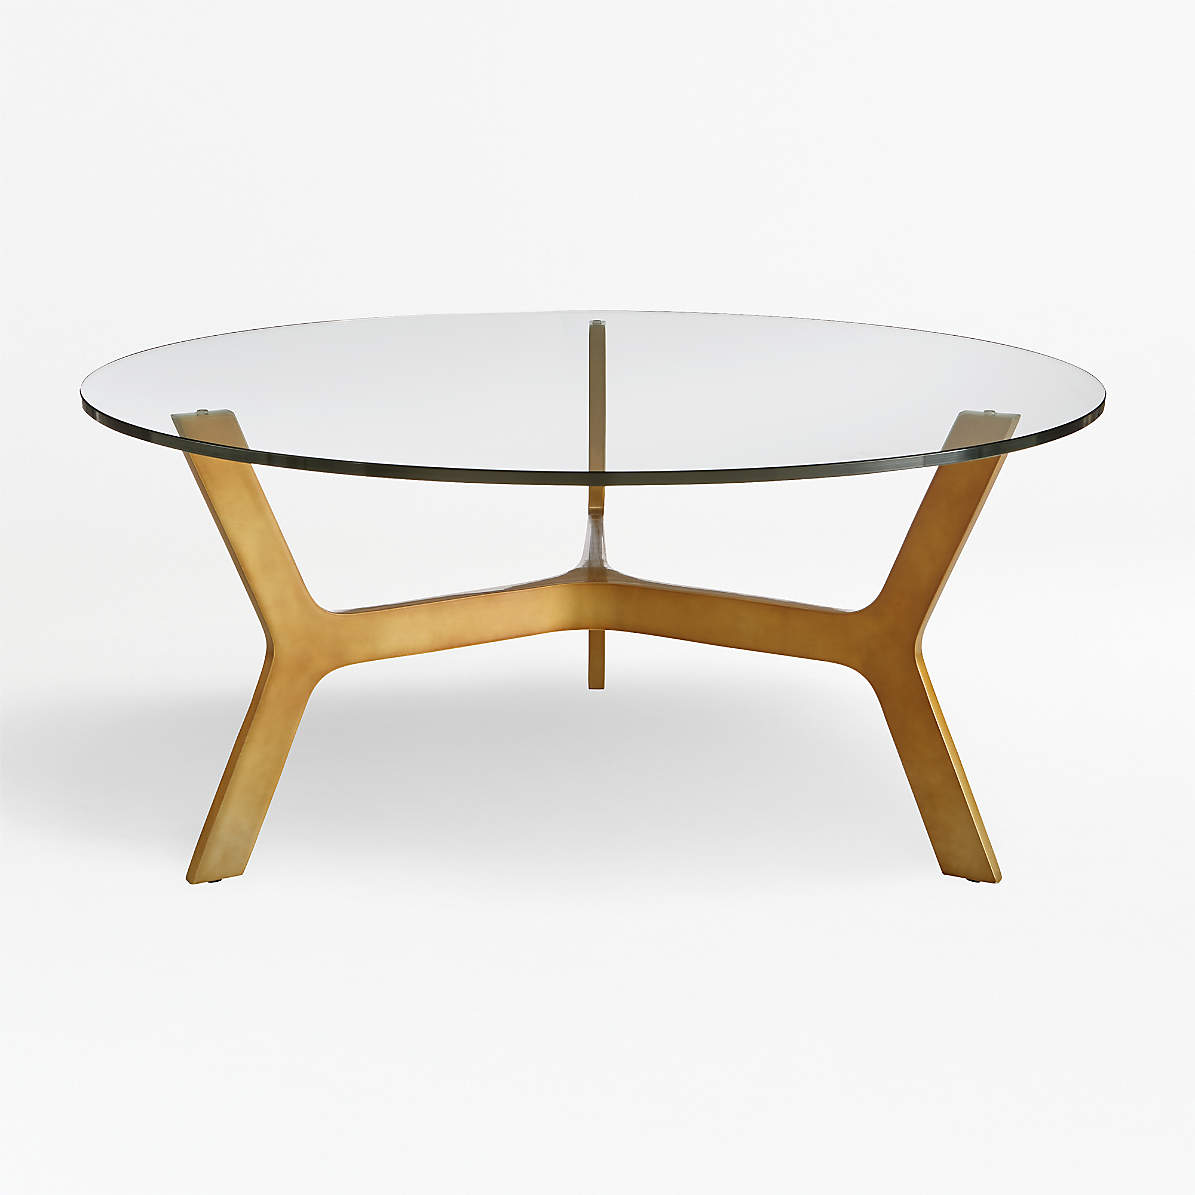 Elke Round Glass Coffee Table With Brass Base Reviews Crate And Barrel